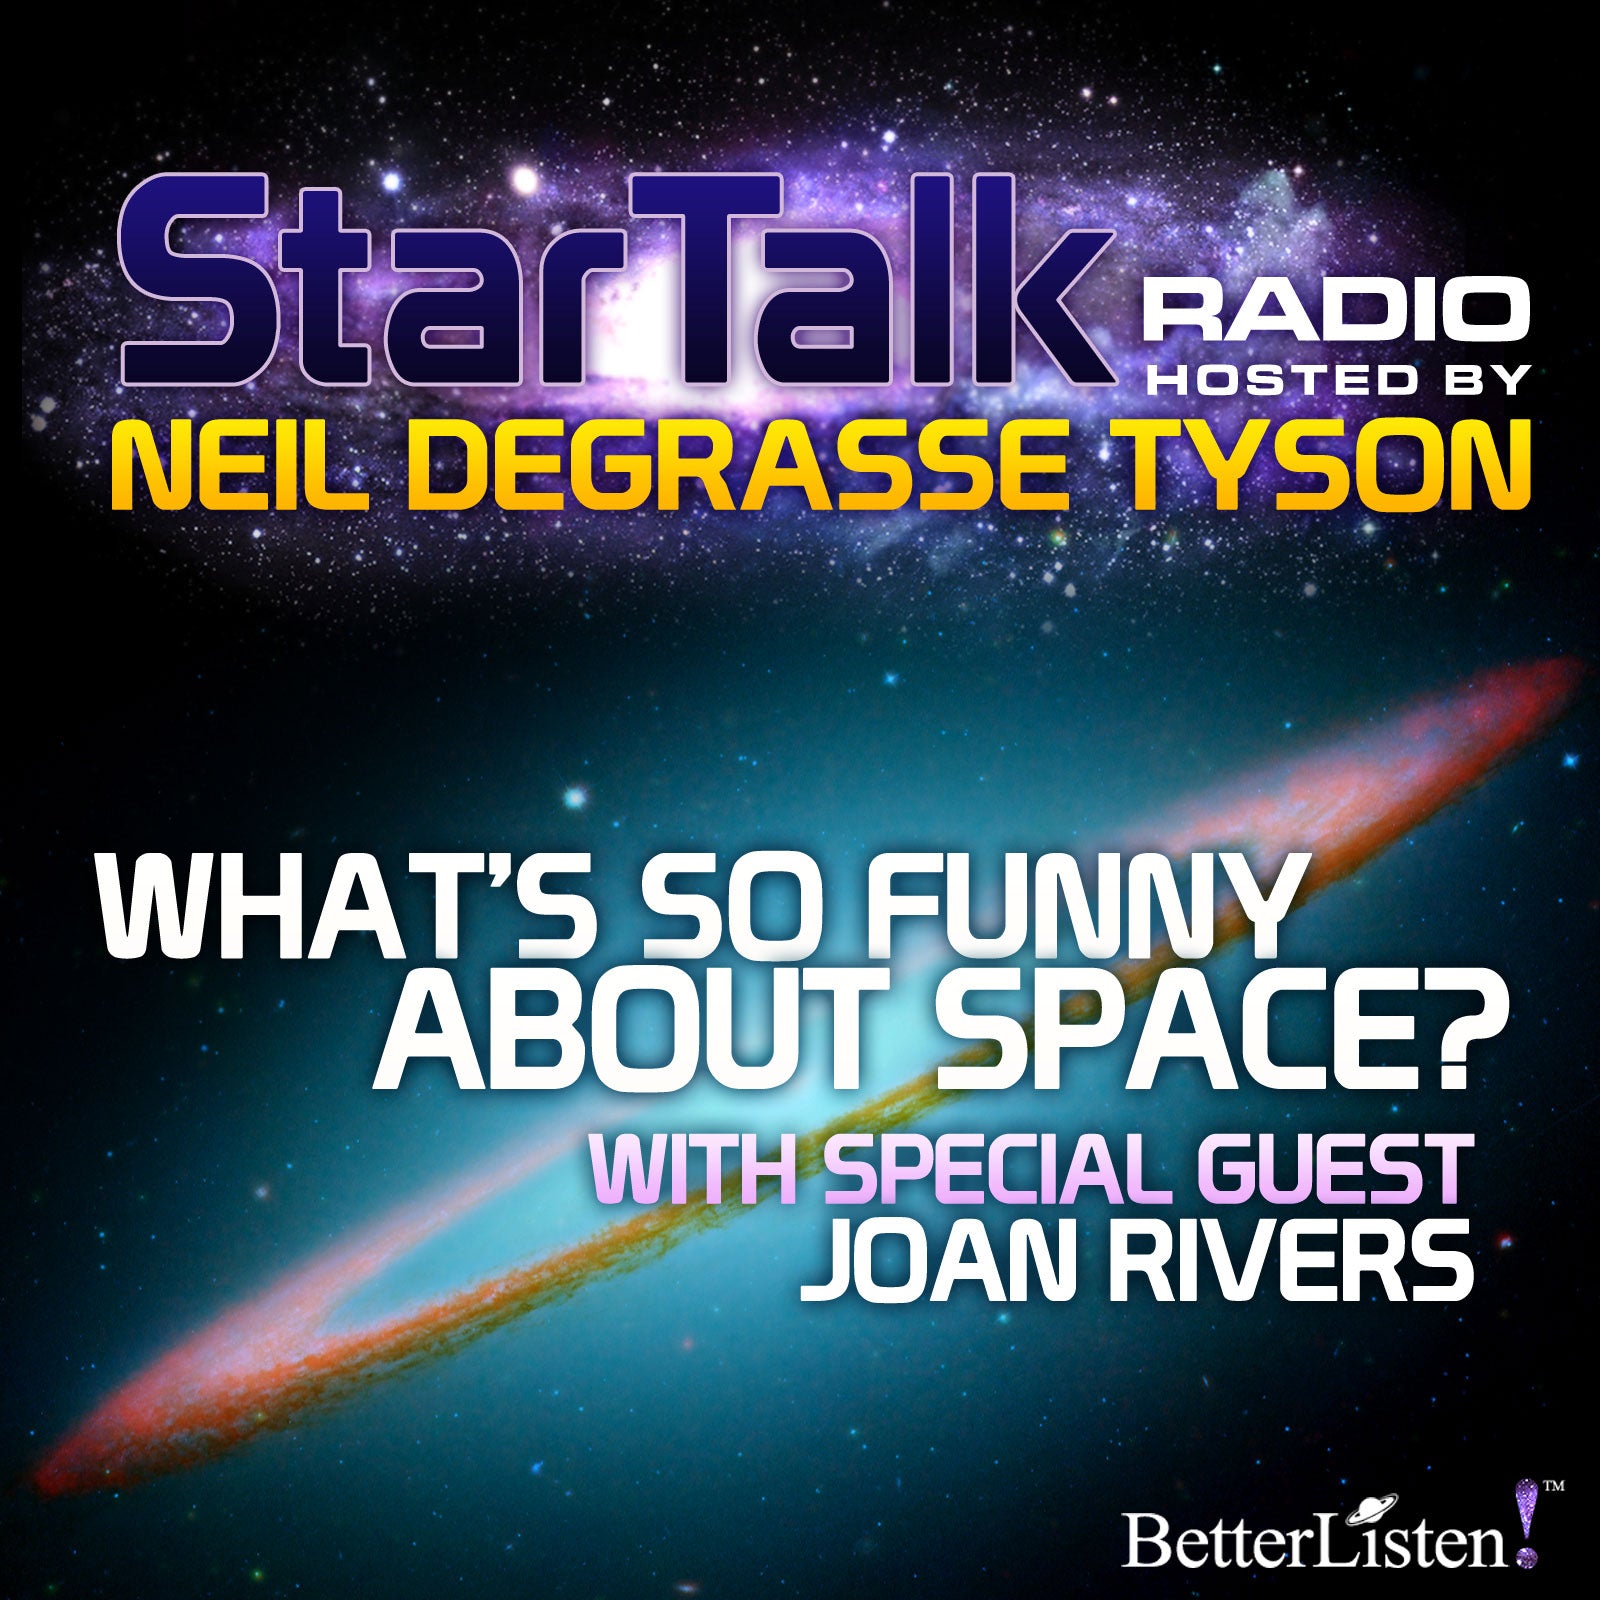 What's So Funny About Space? With Special Guest Joan Rivers Audio Program StarTalk - BetterListen!